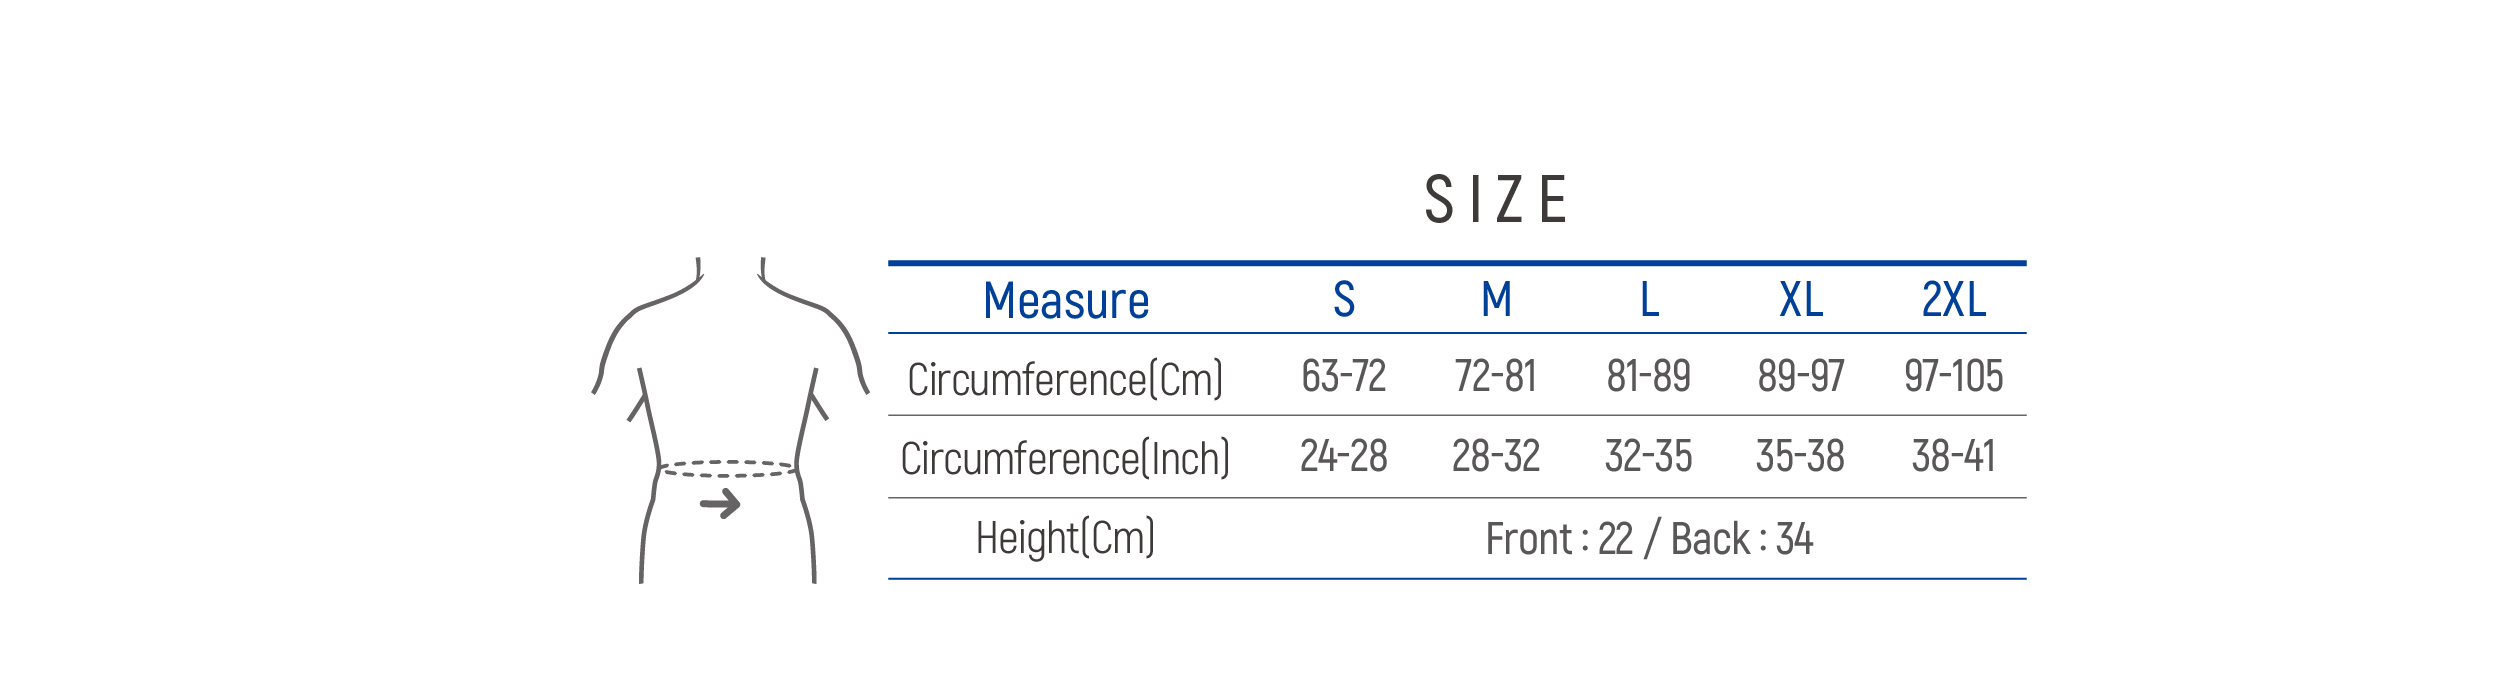 DR-3G Size table image